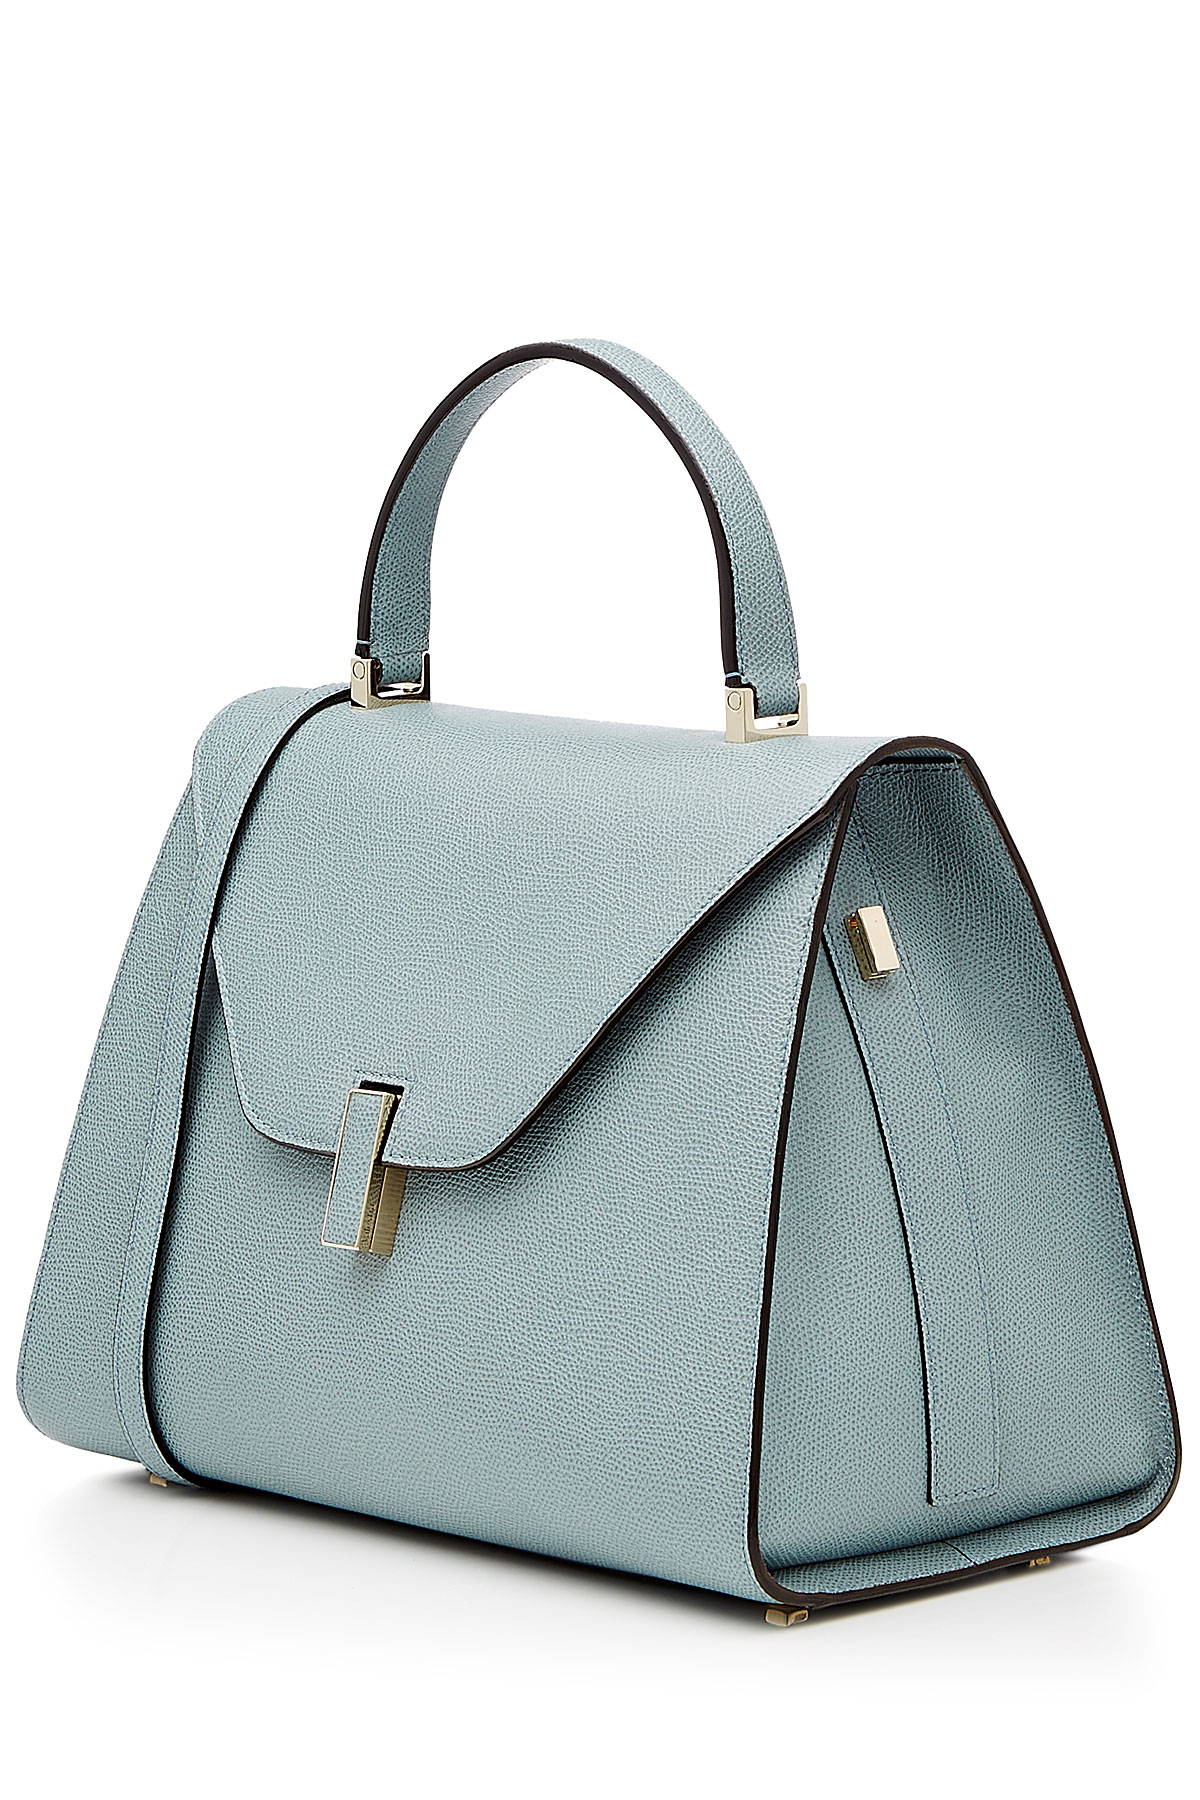 Valextra Isis Leather Tote - Blue - Lyst